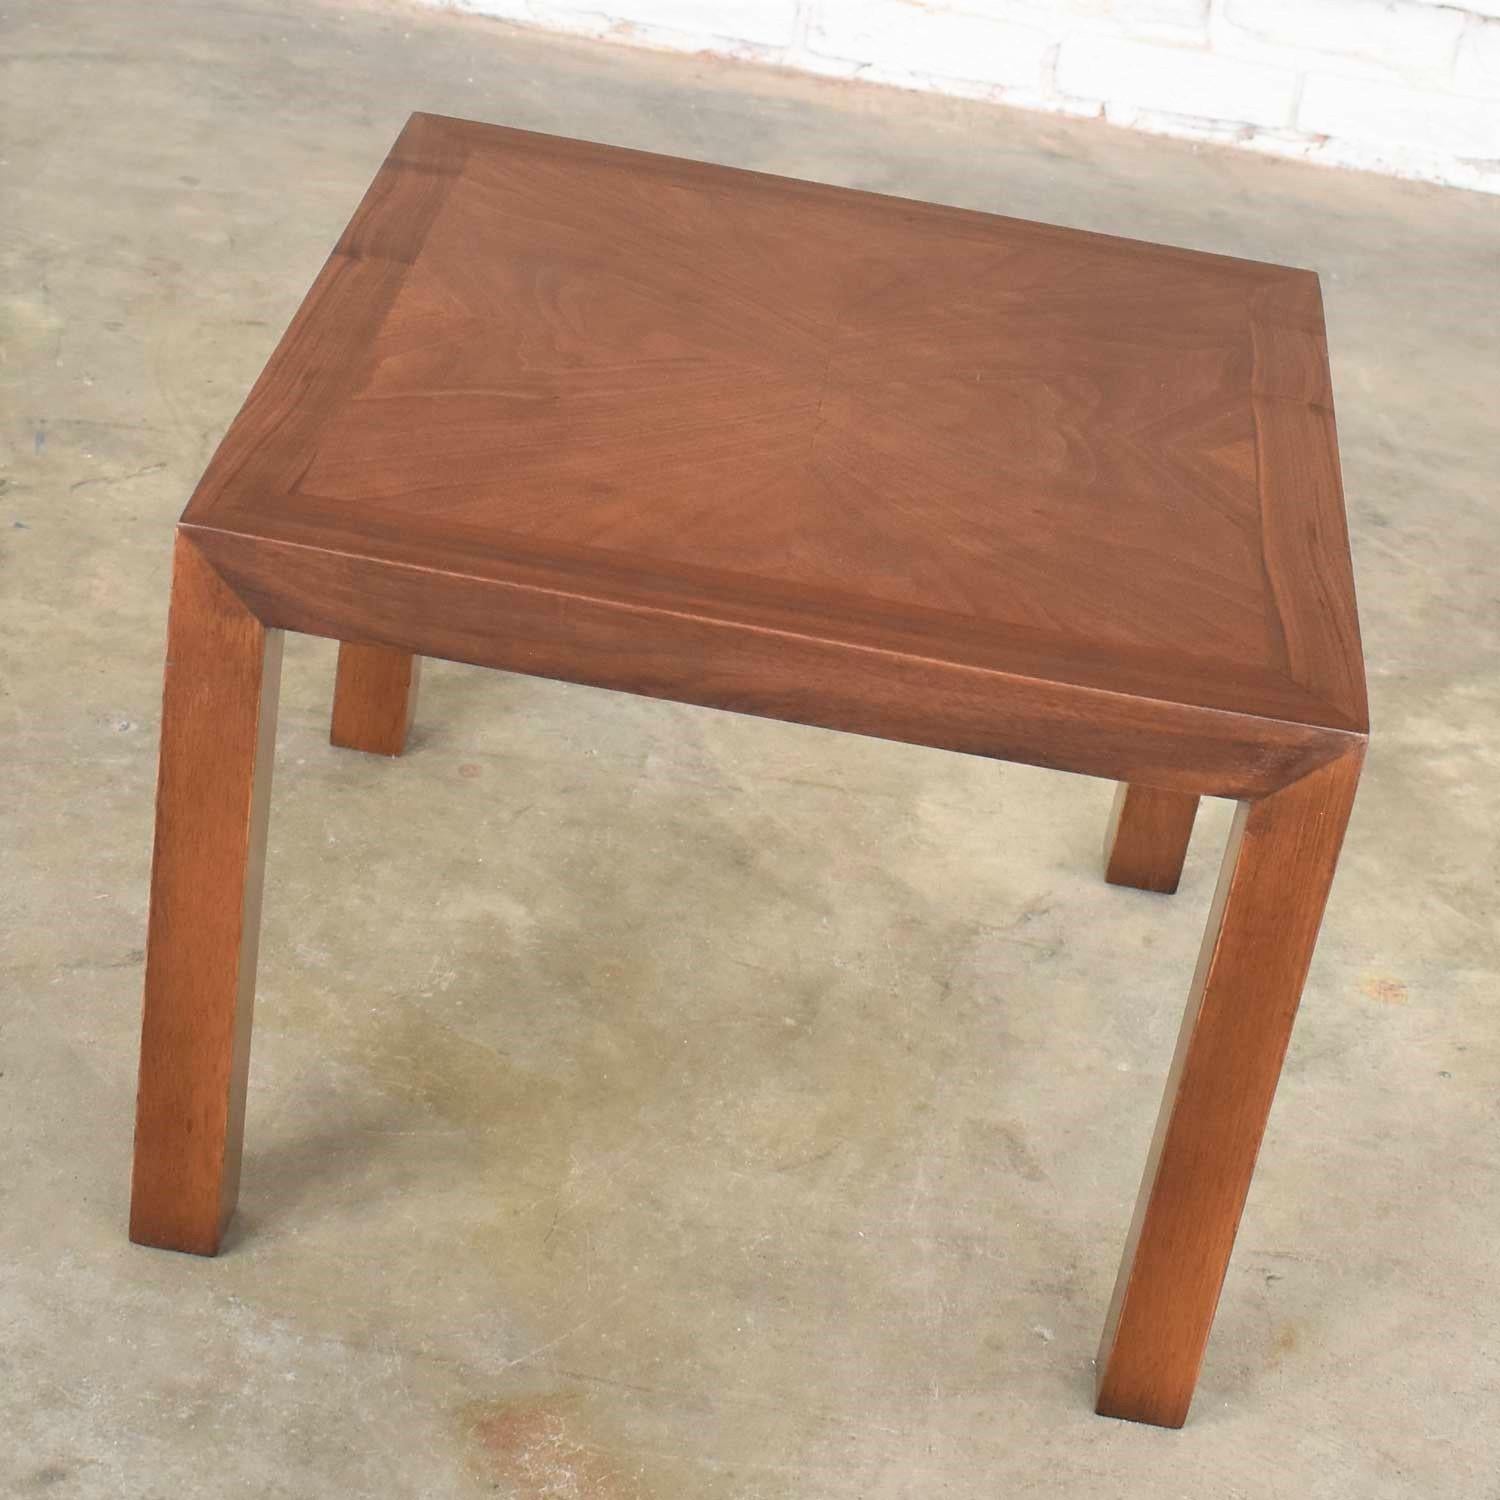 Handsome vintage modern square solid walnut Parsons’ side table with walnut inlay created by Lane Alta Vista in 1970. It is in wonderful ready to use condition. The top has been refinished as it had several cigarette burns. There may still be small